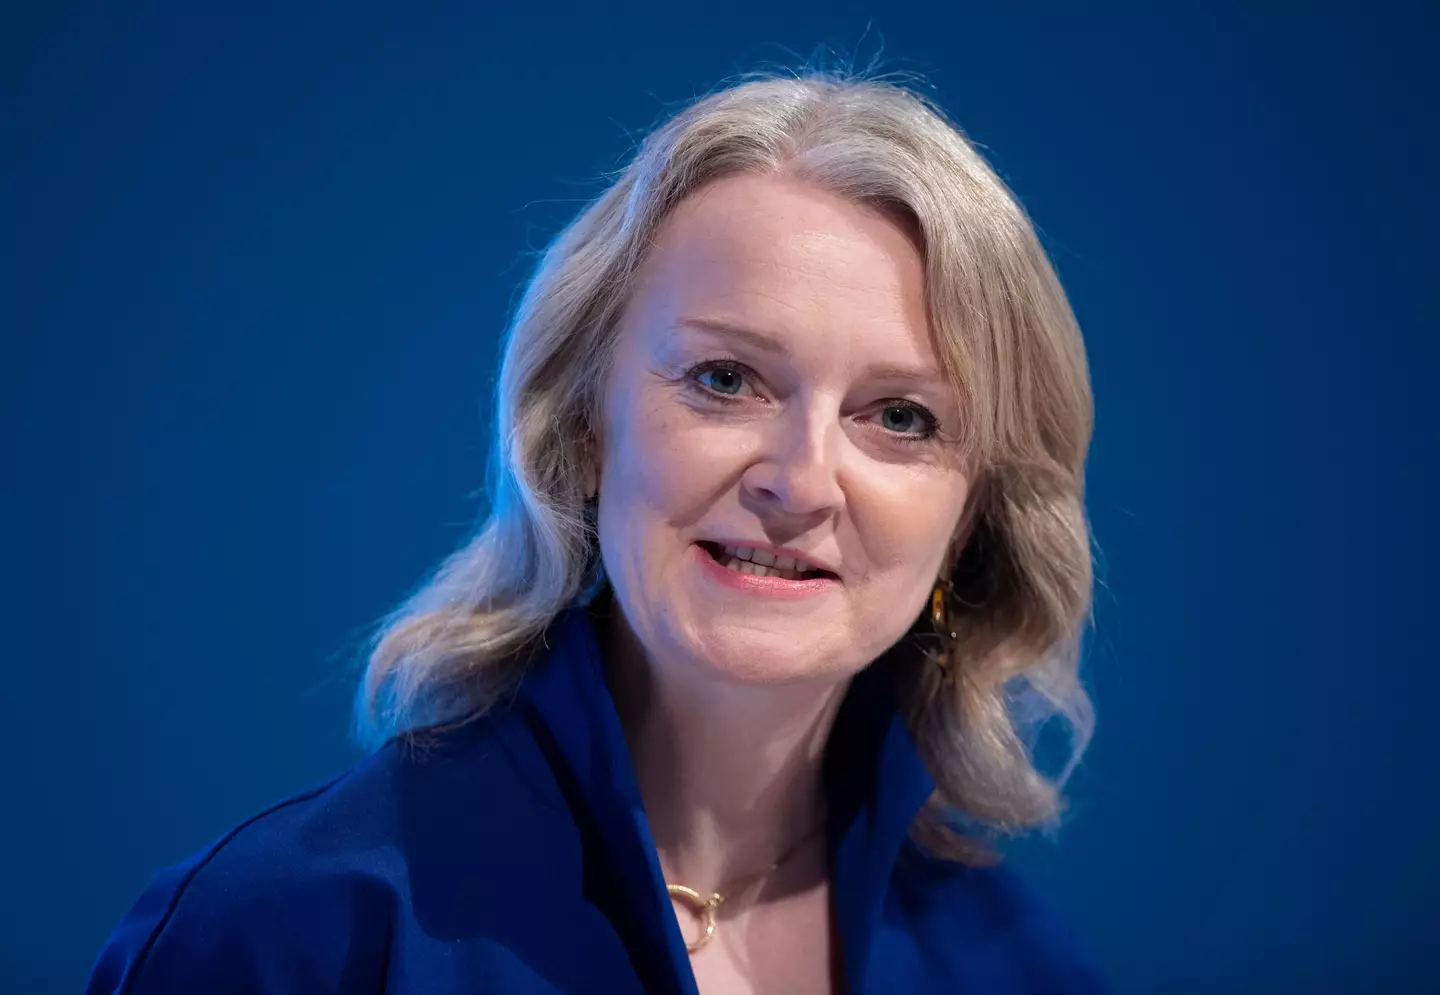 Liz Truss is expected to be the next PM.